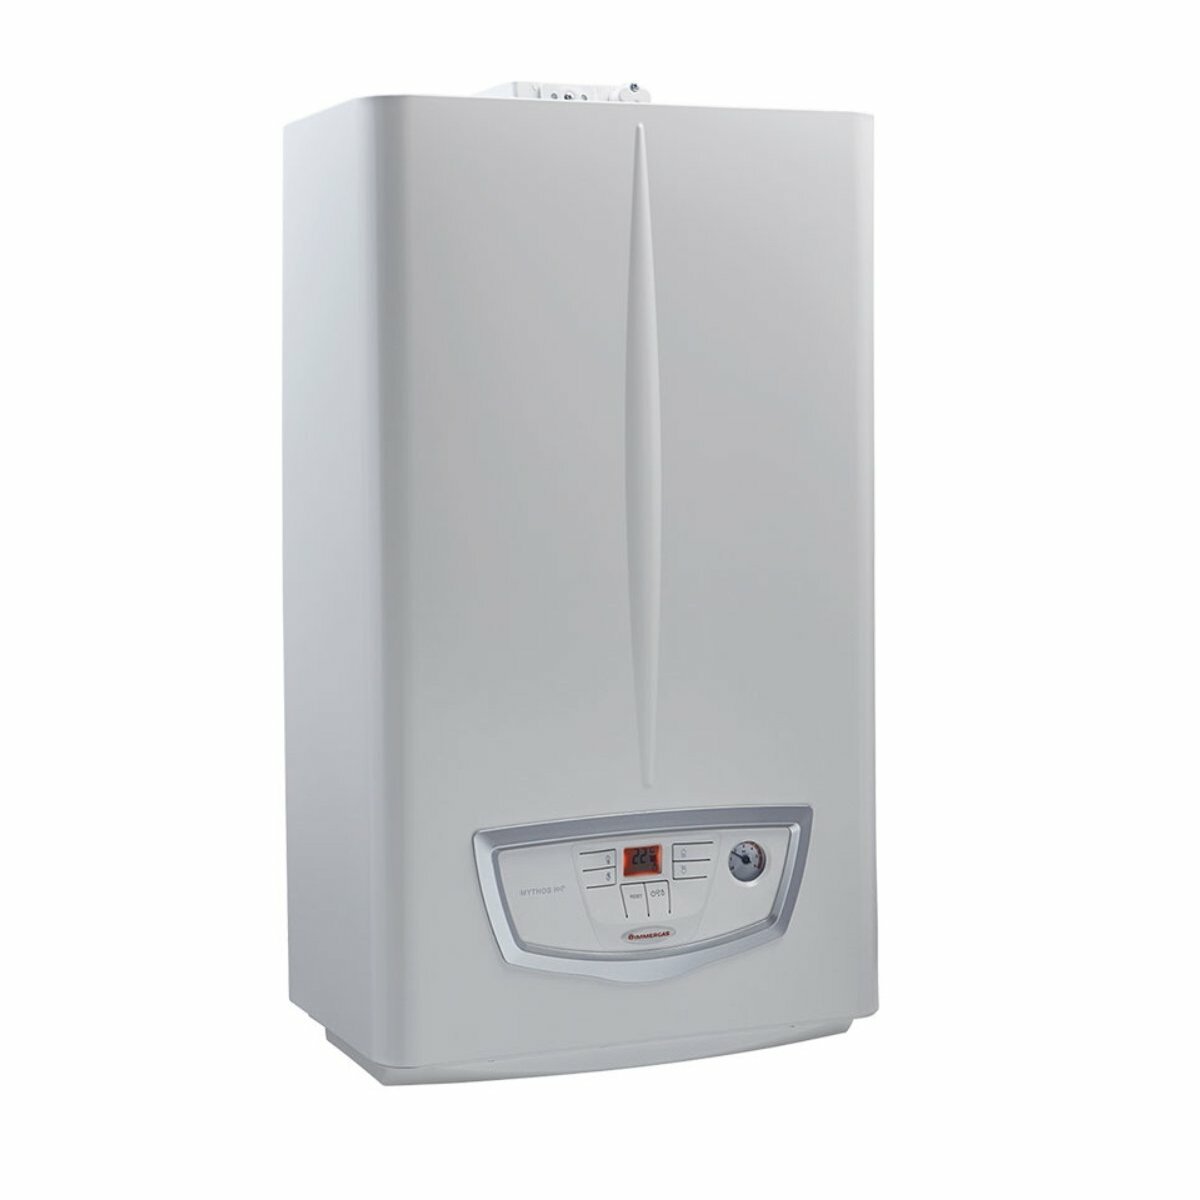 Immergas Mythos HP condensing boiler with sealed chamber 24 kW methane